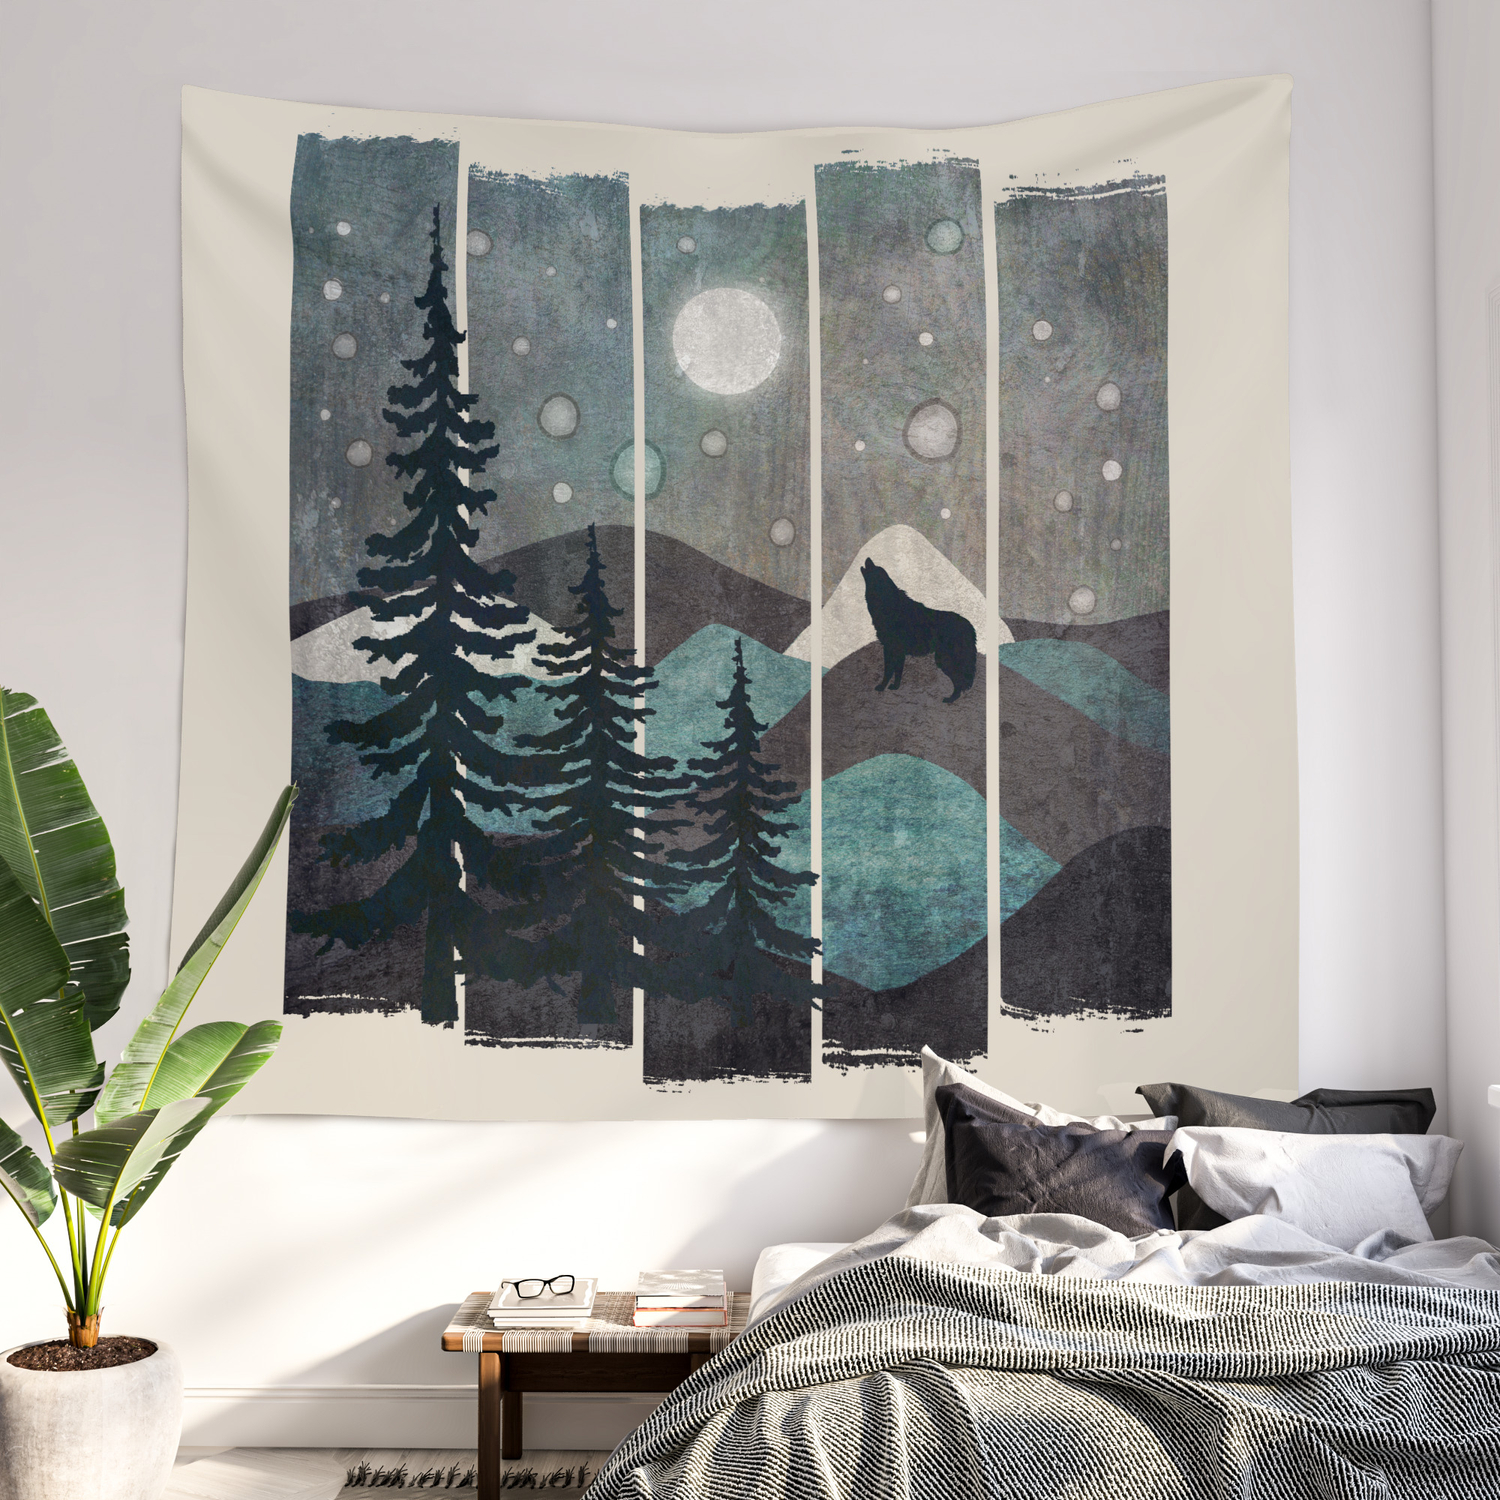 Printed Tapestry Full Moon Night Wolf Tapestry Brushed Fabric Wall Hanging 